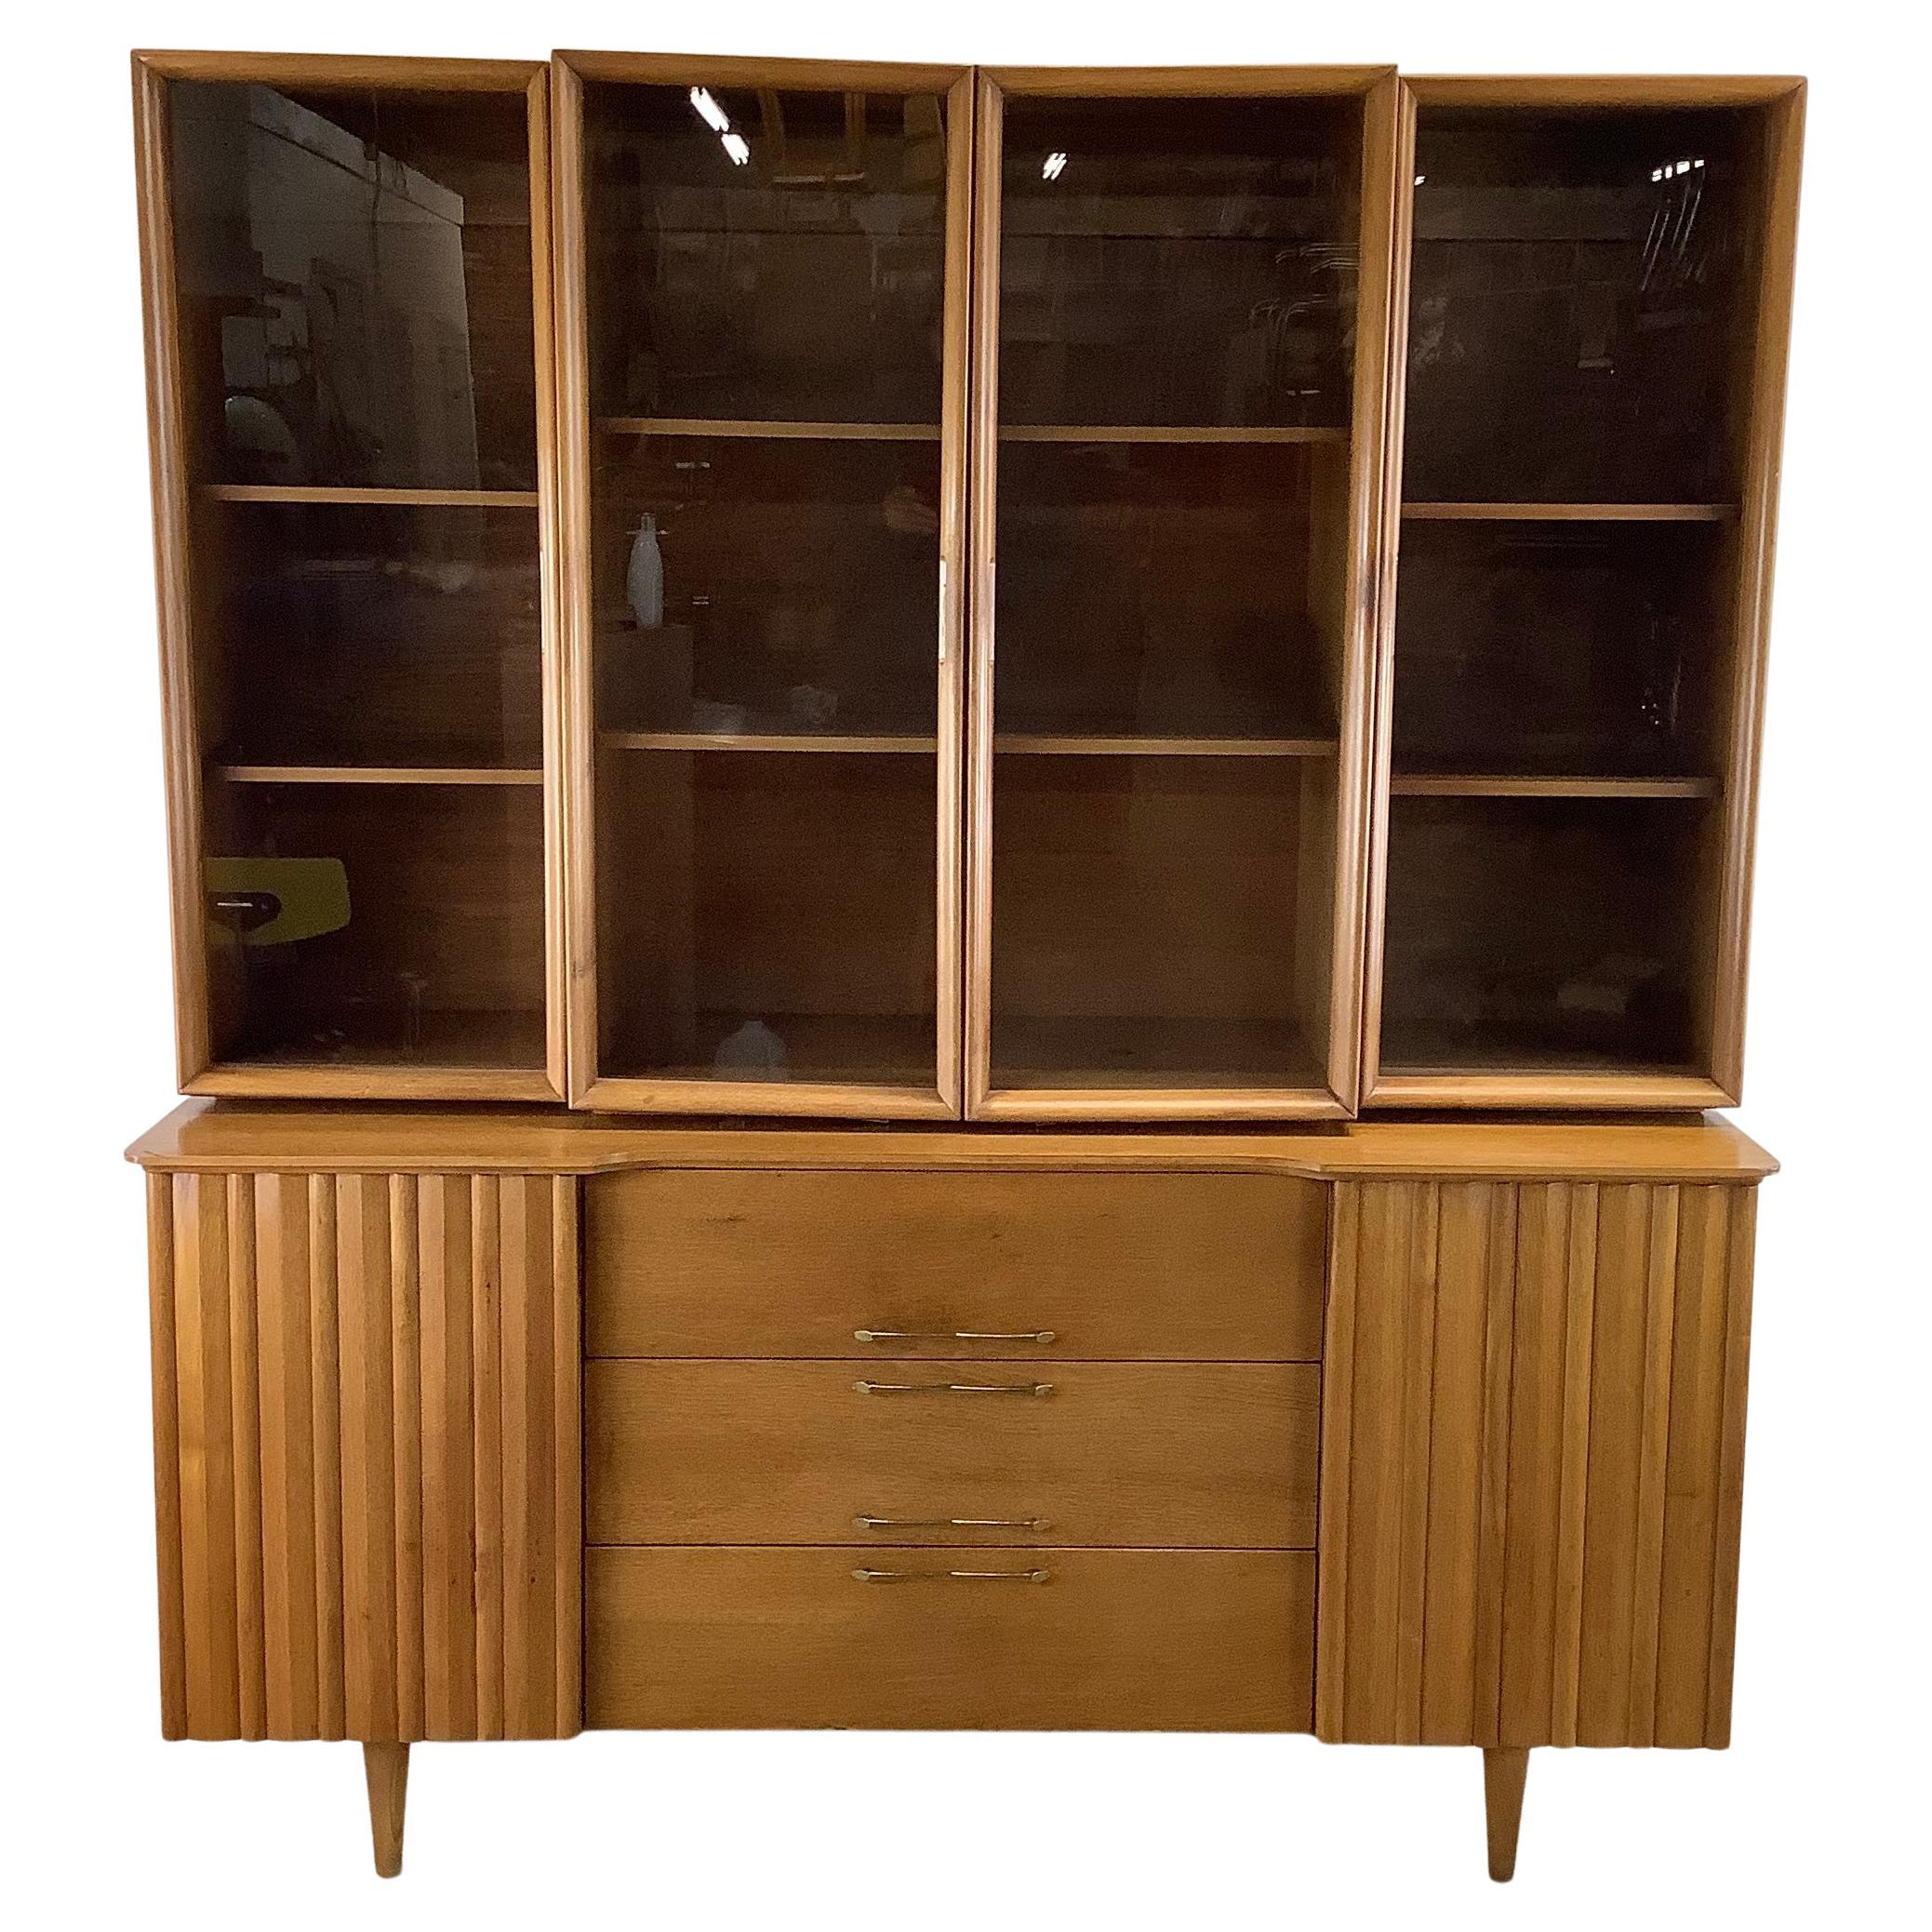 Mid-Century Modern Walnut Sideboard with Display Topper